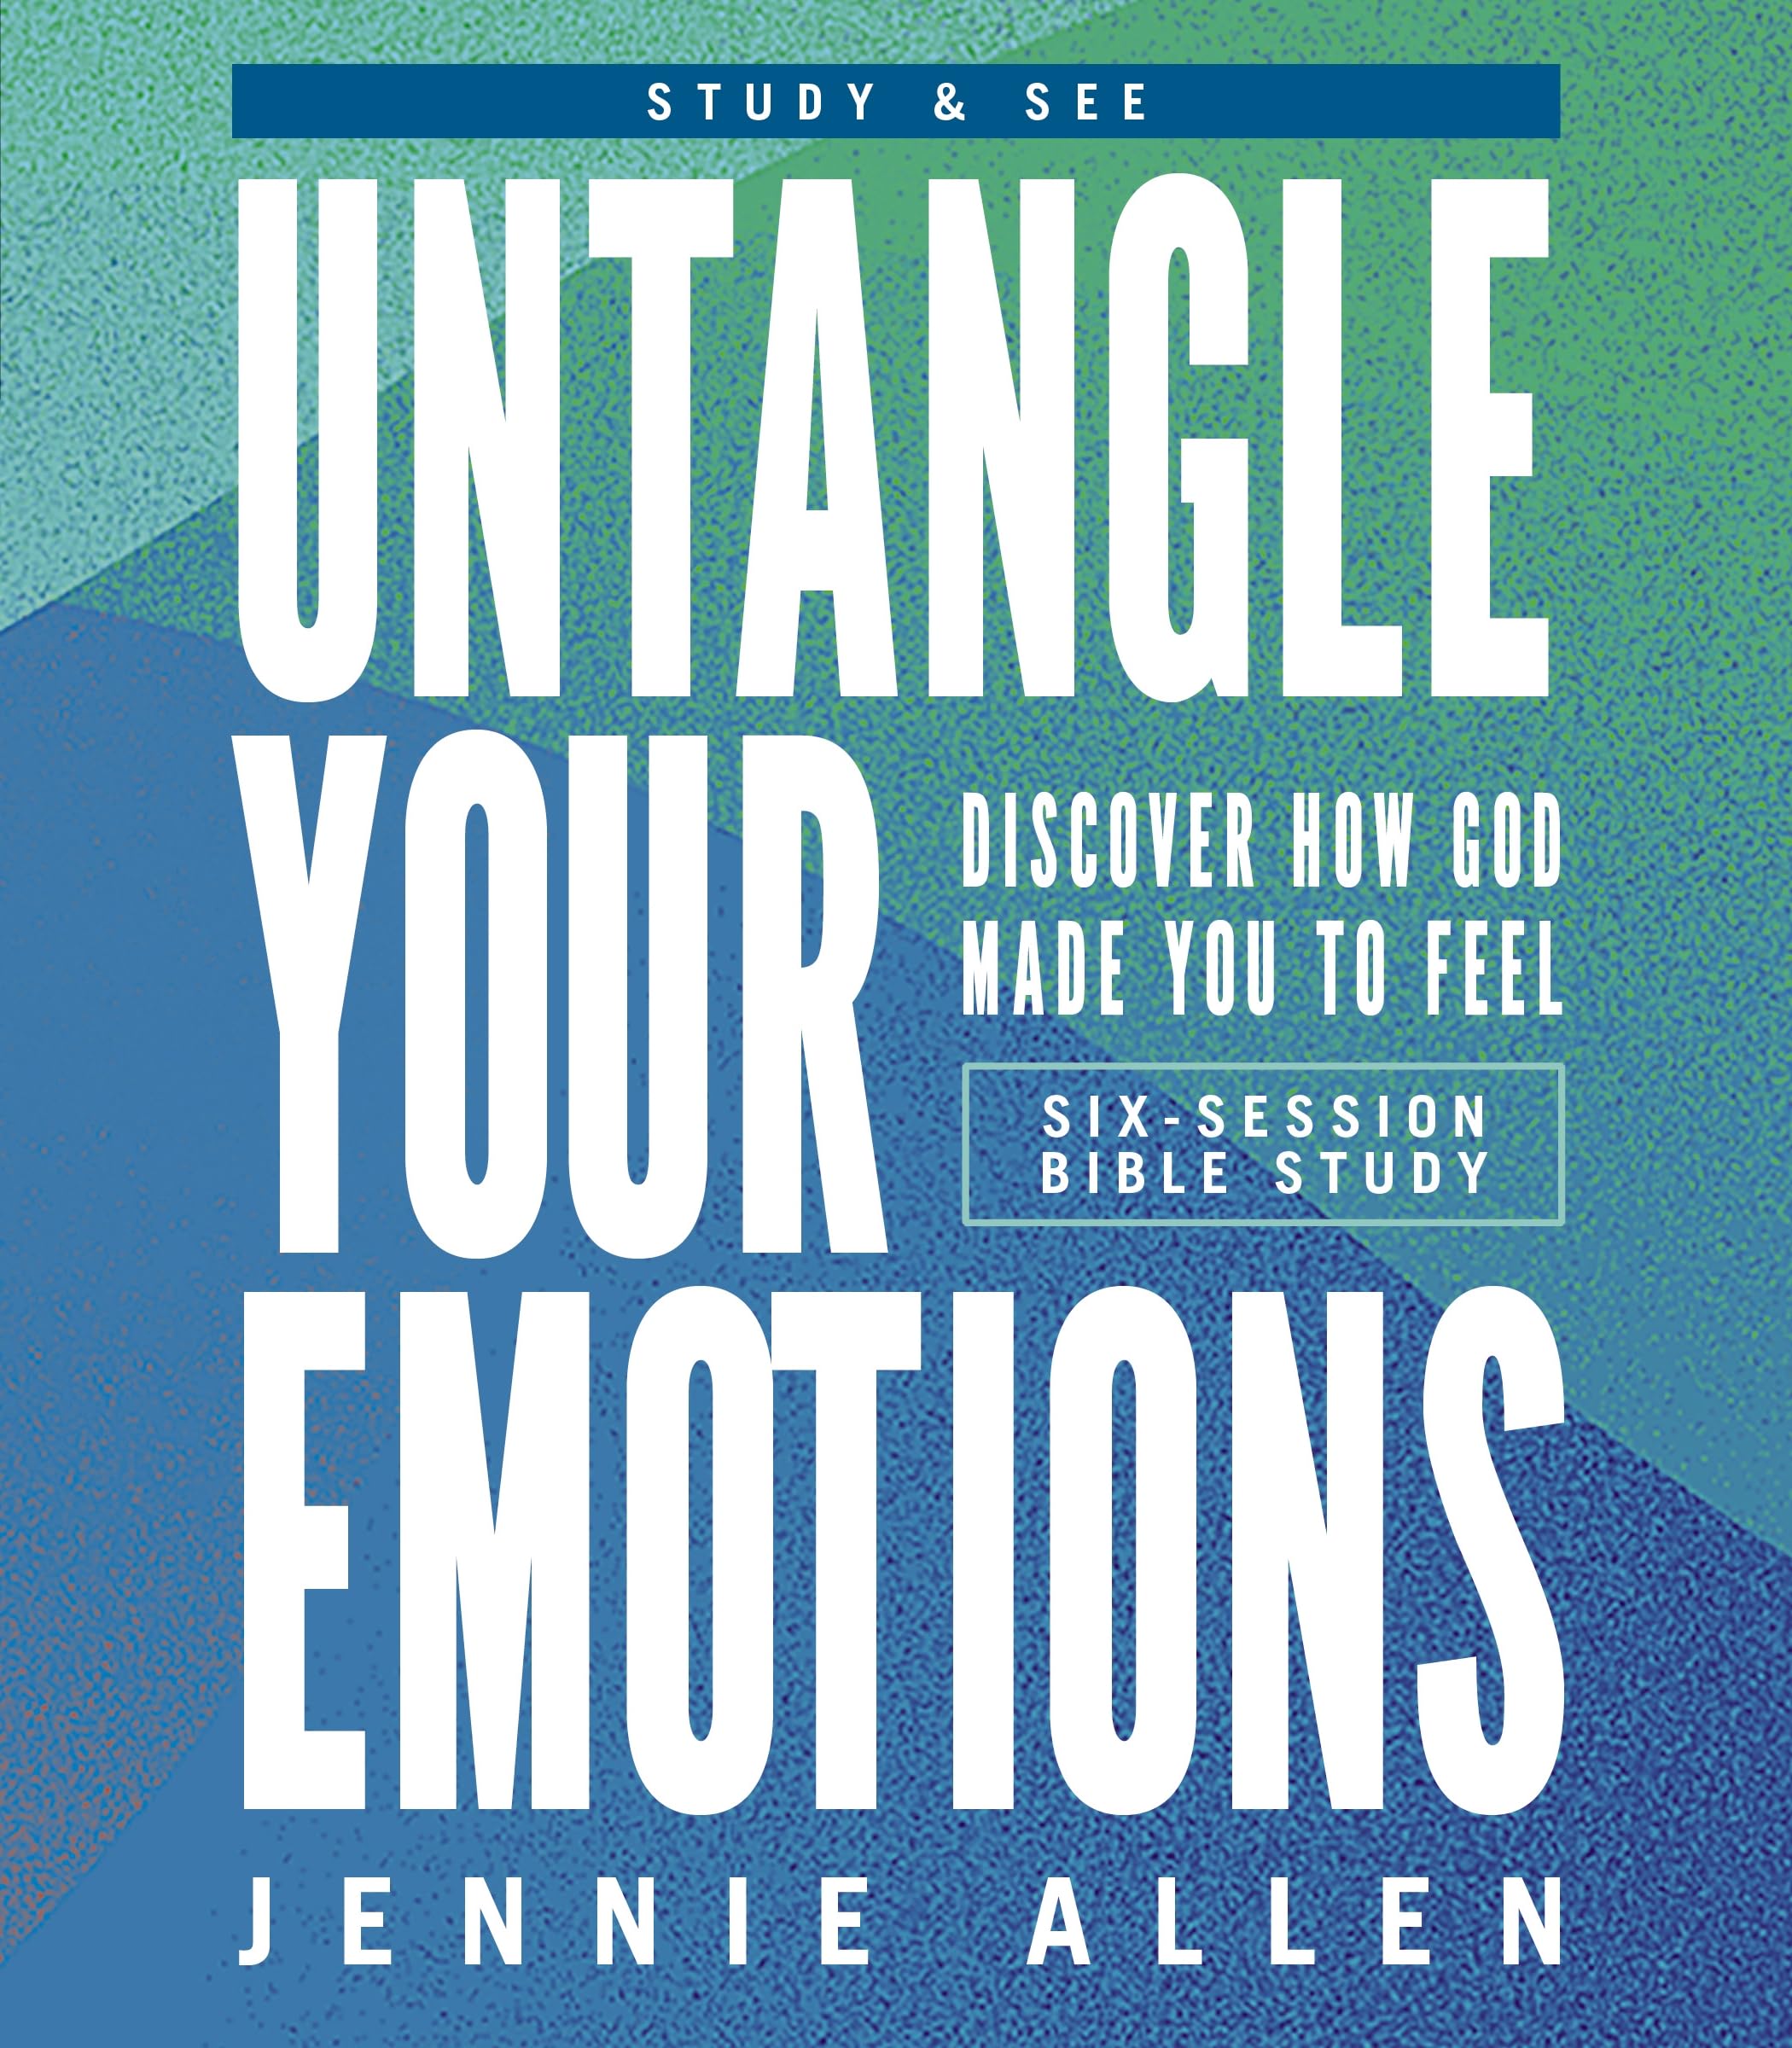 Untangle Your Emotions Bible Study Guide Plus Streaming Video: Discover How God Made You to Feel by Allen, Jennie